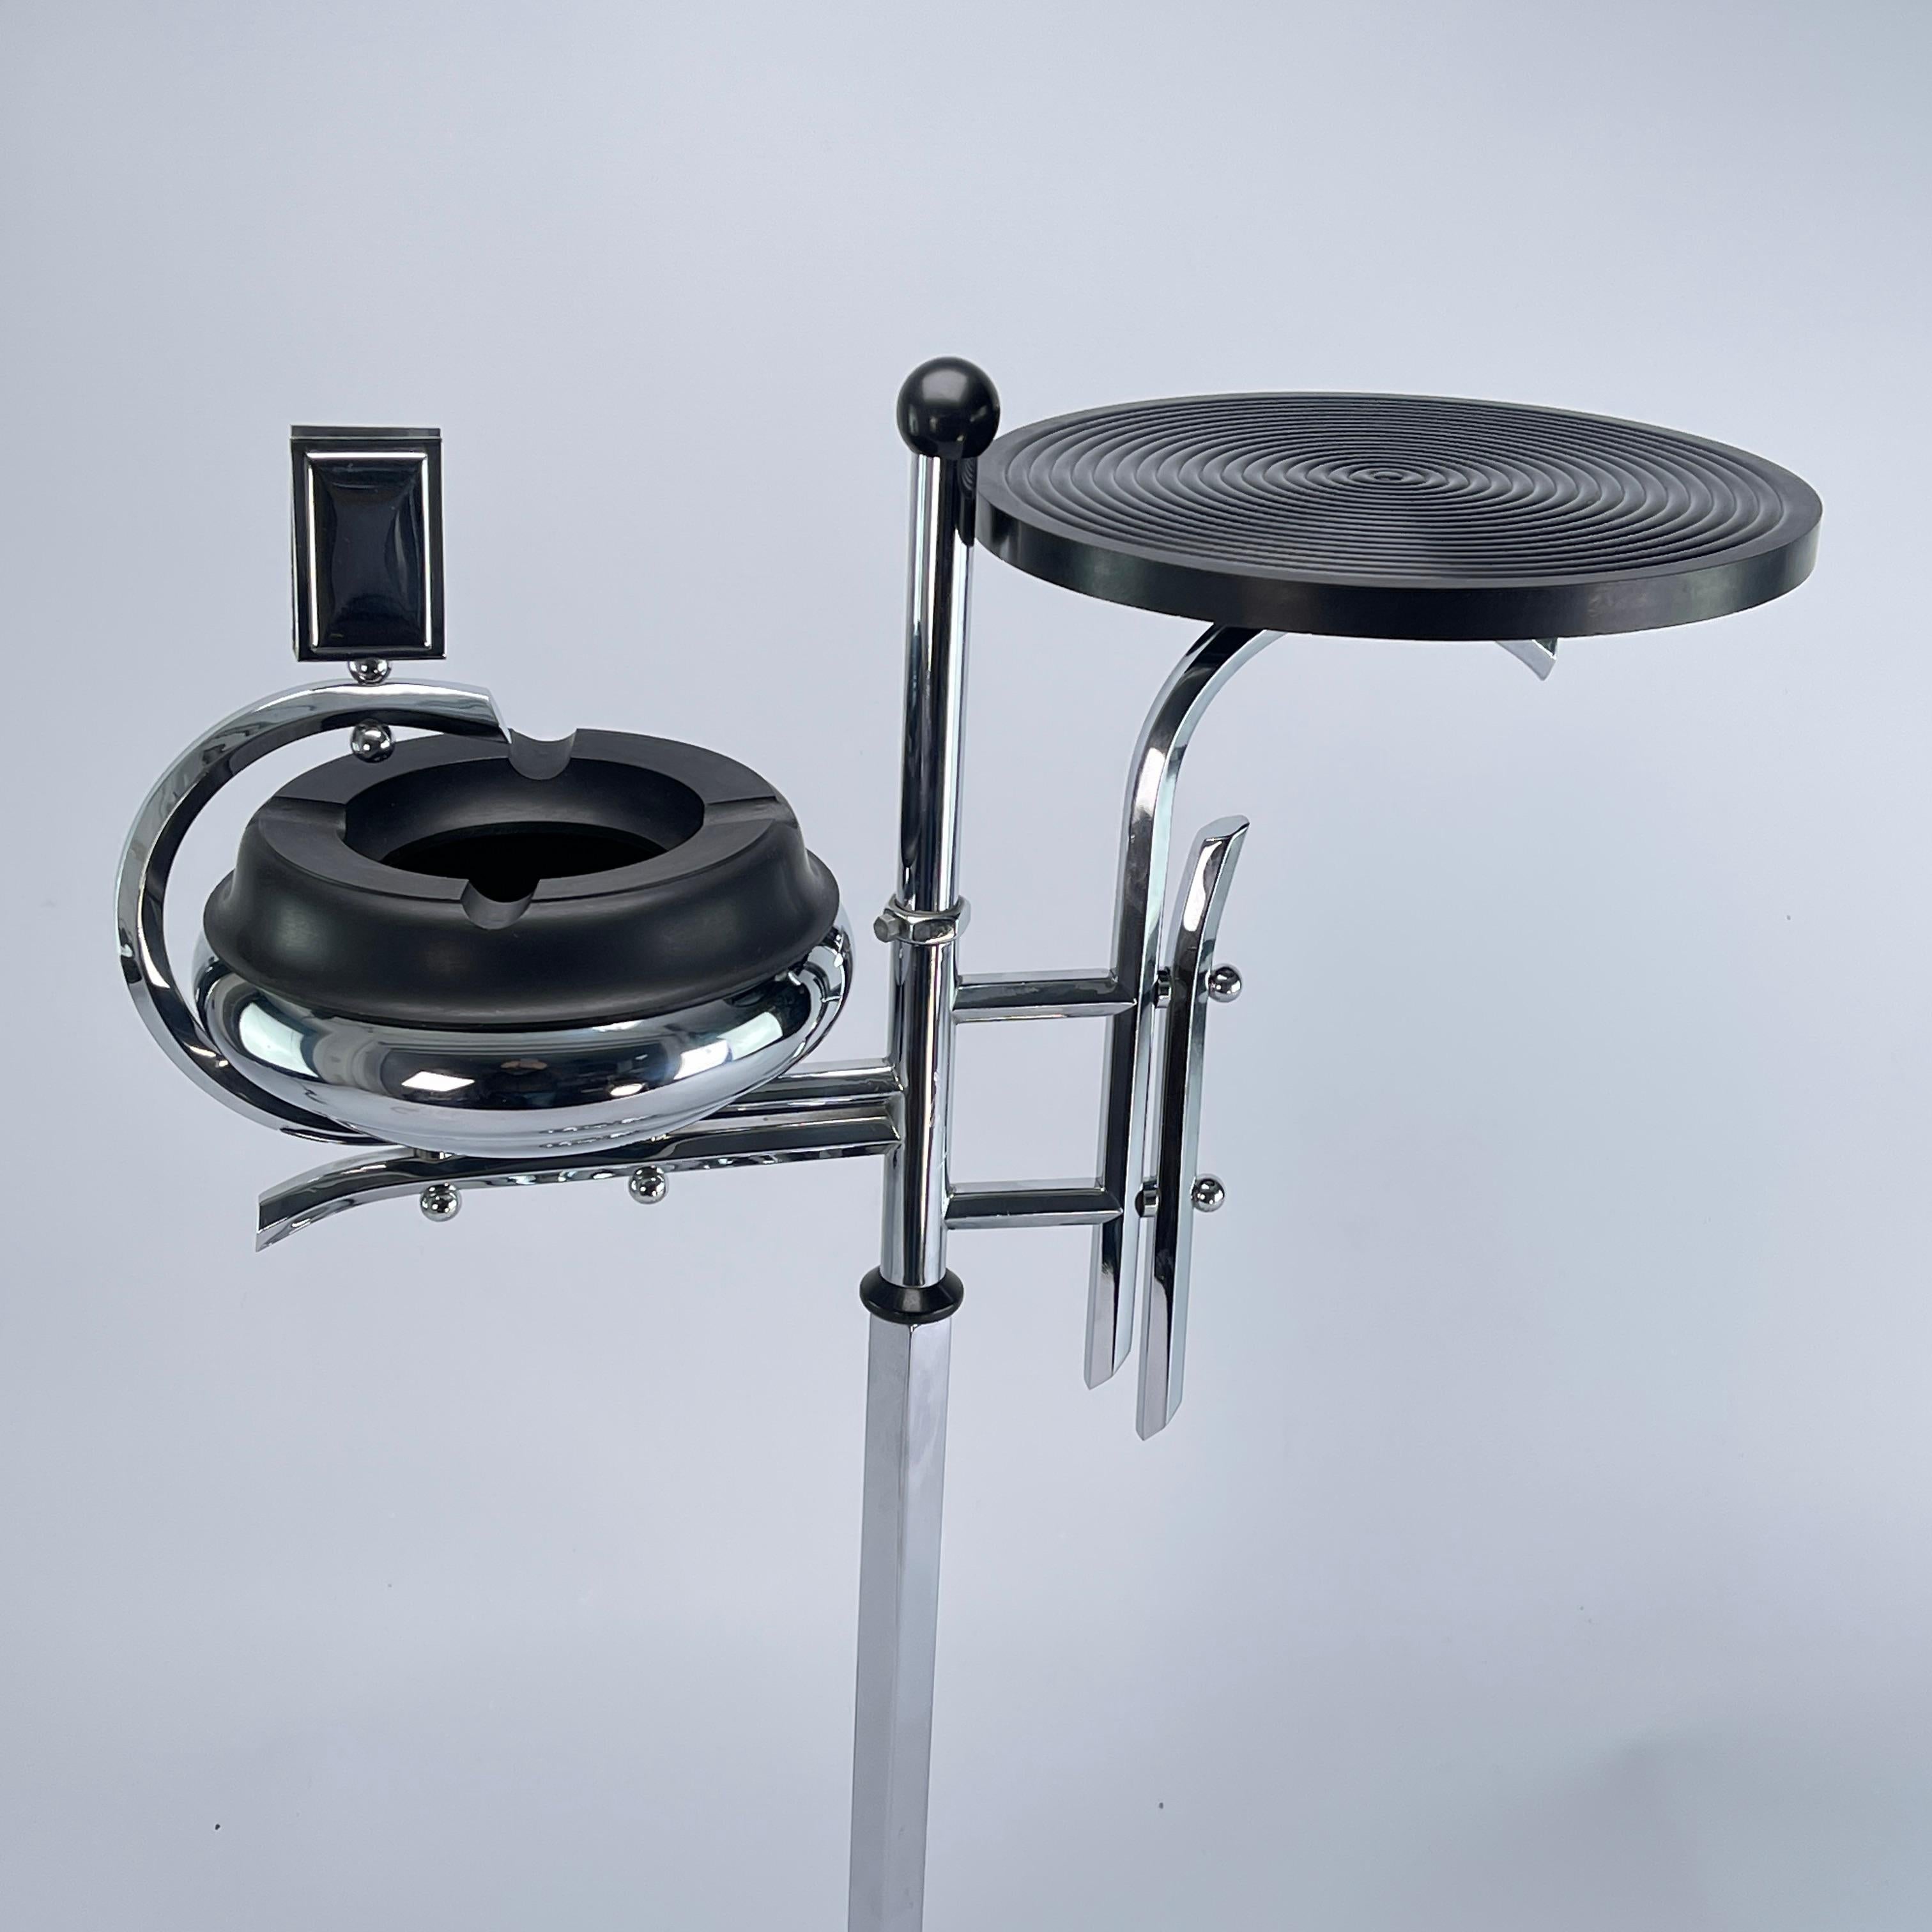 Art Deco ashtray stand

This beautiful and rare Art Deco Ashtray Stand from the 30s/40s is in the streamline modern art deco style. The designer of this extraordinary object has succeeded in combining functionality, design, style and aesthetics.